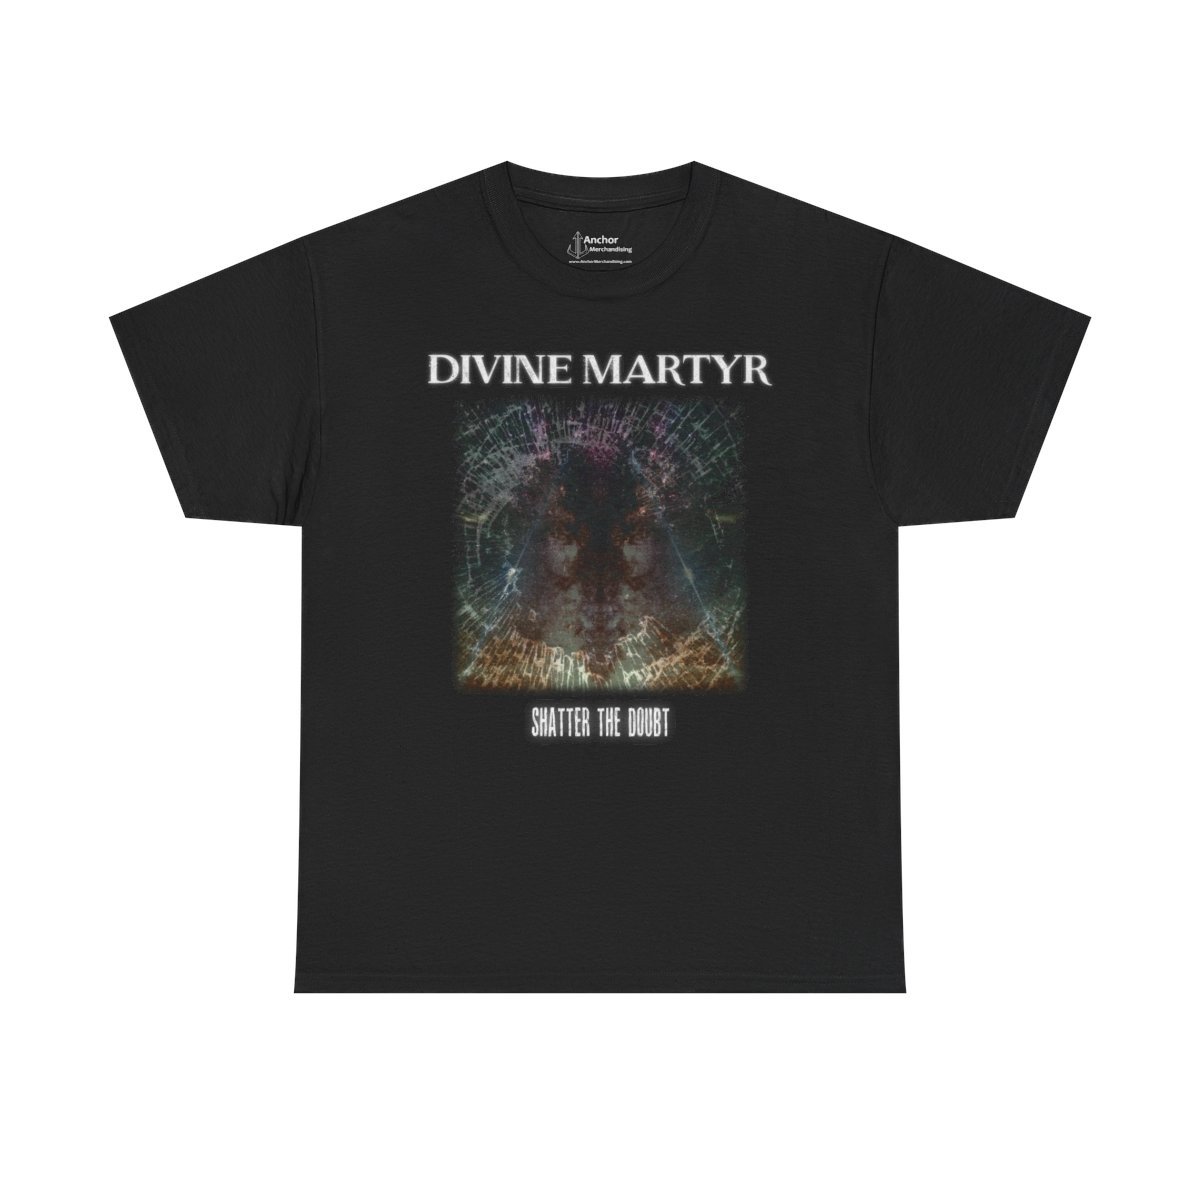 Divine Martyr – Shatter The Doubt Short Sleeve Tshirt (2-Sided)